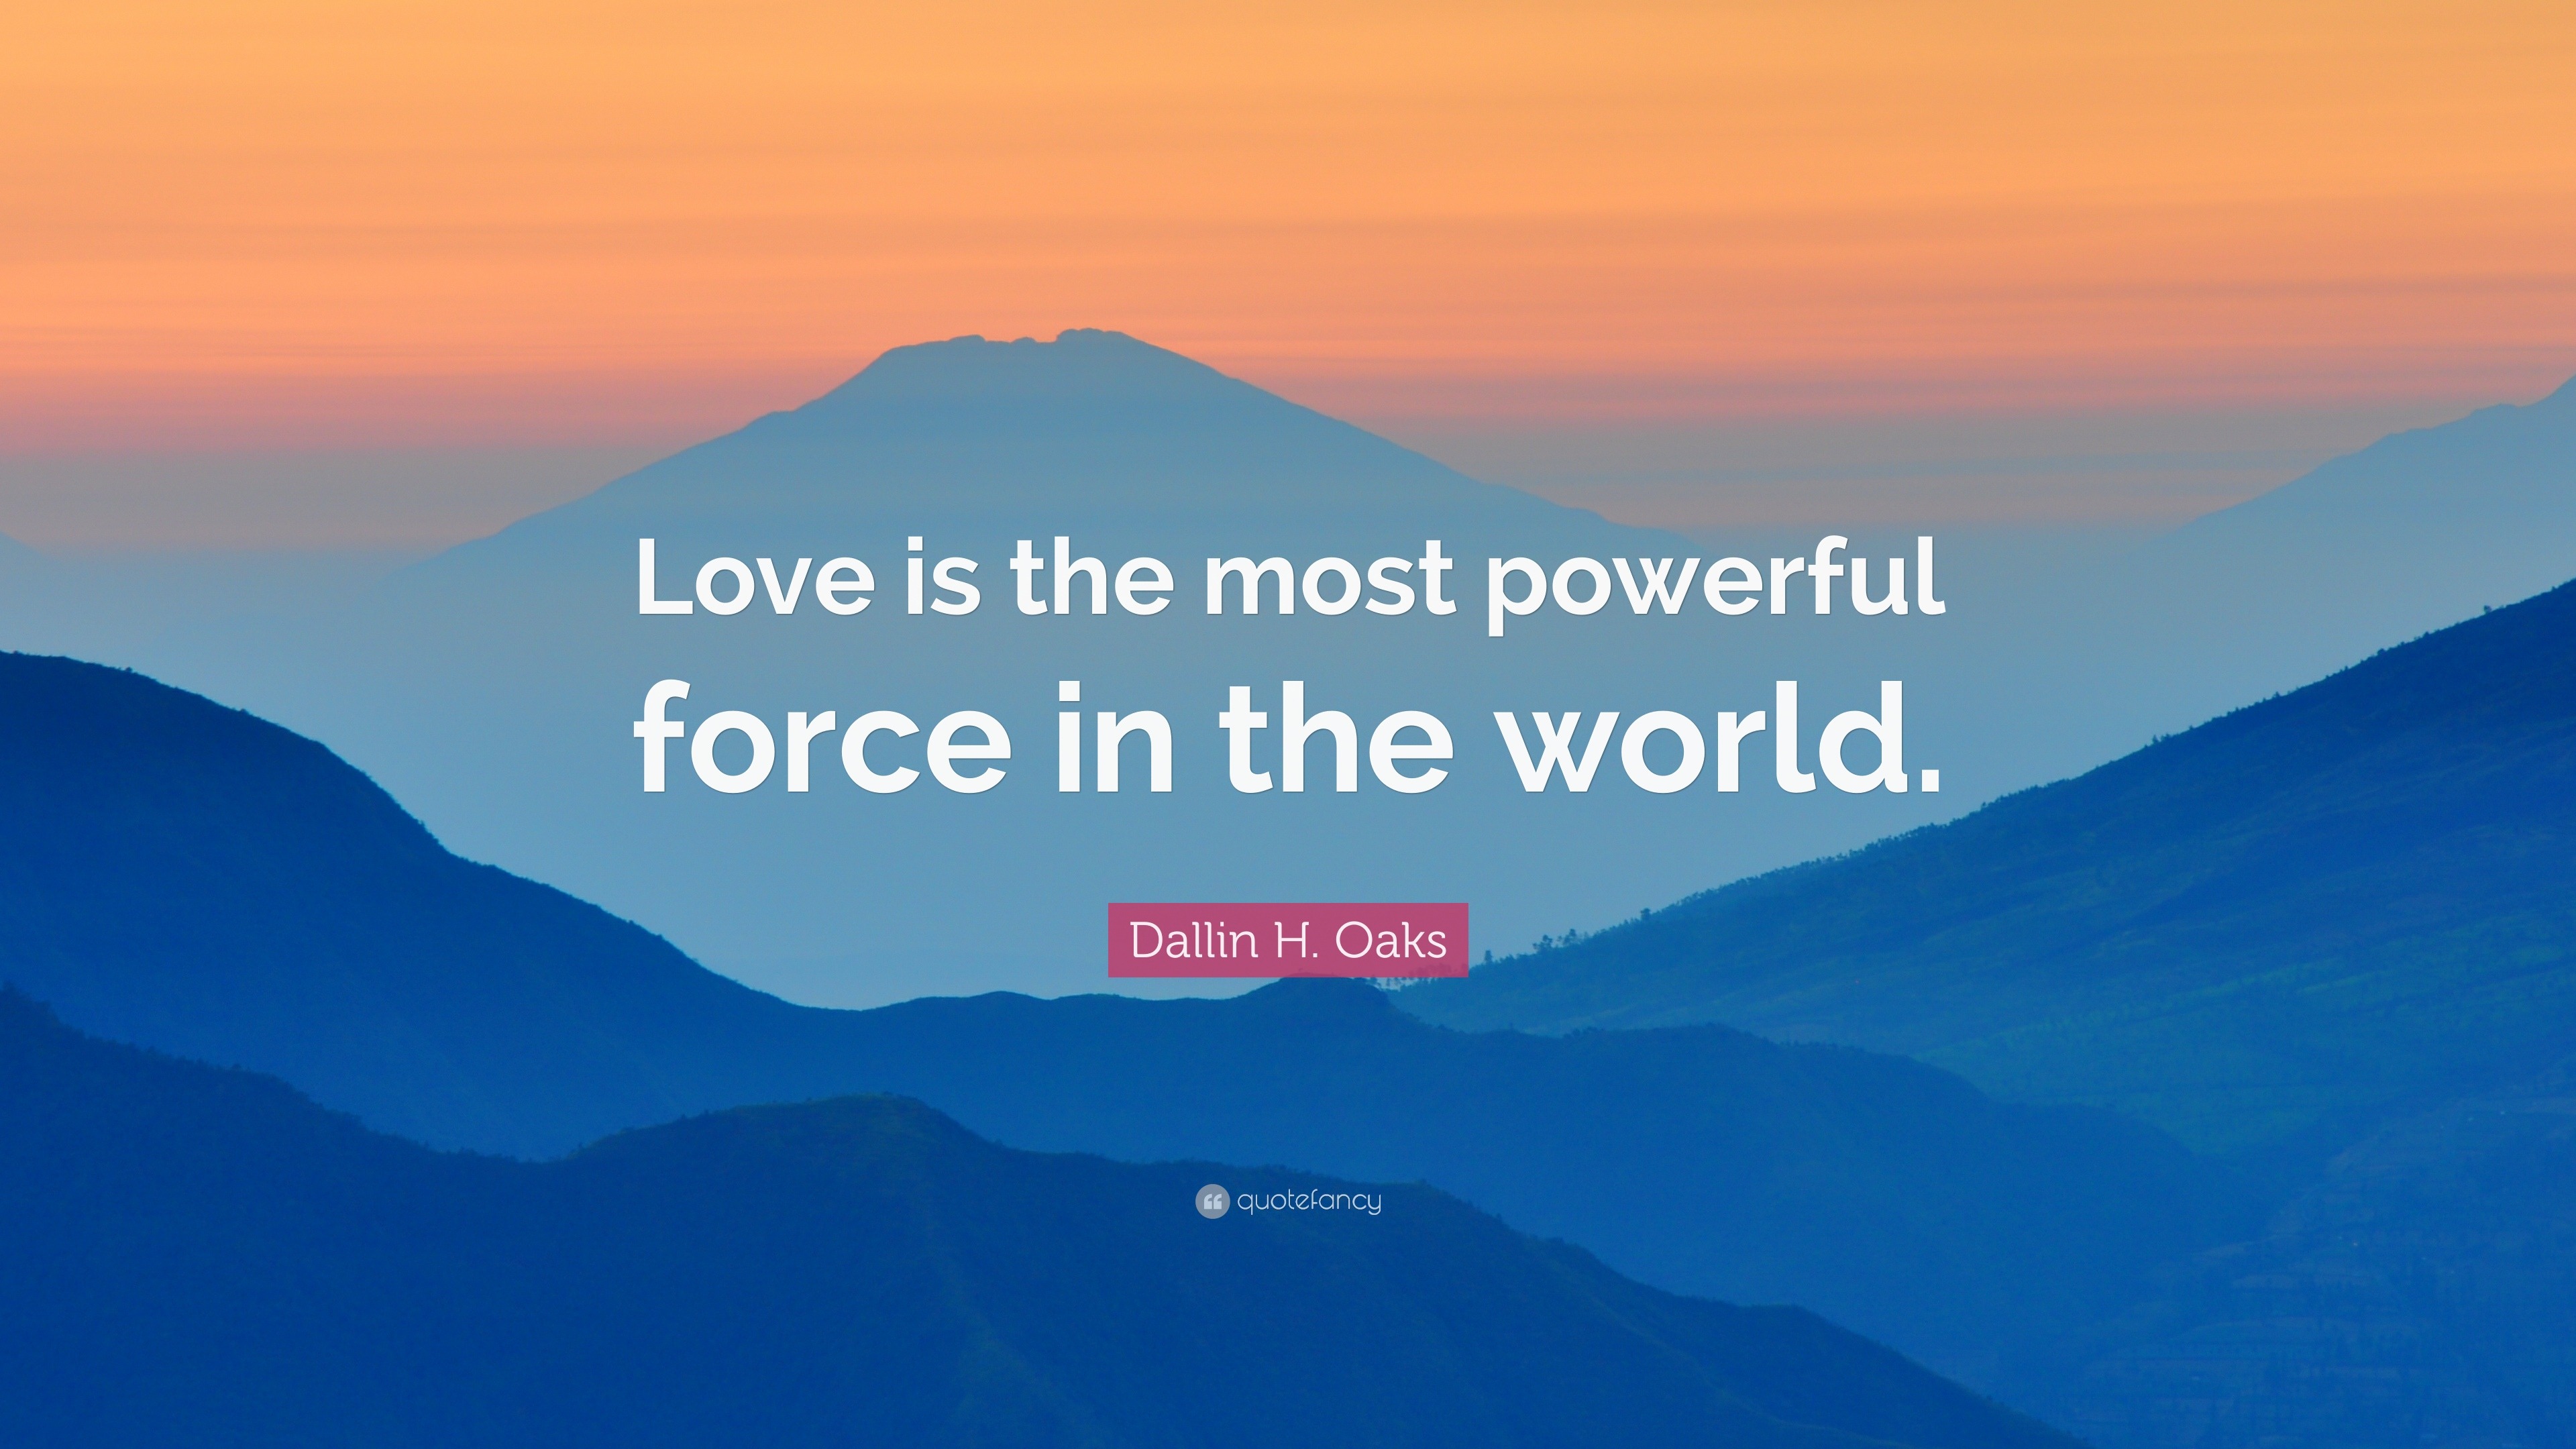 Dallin H. Oaks Quote: "Love is the most powerful force in the world."